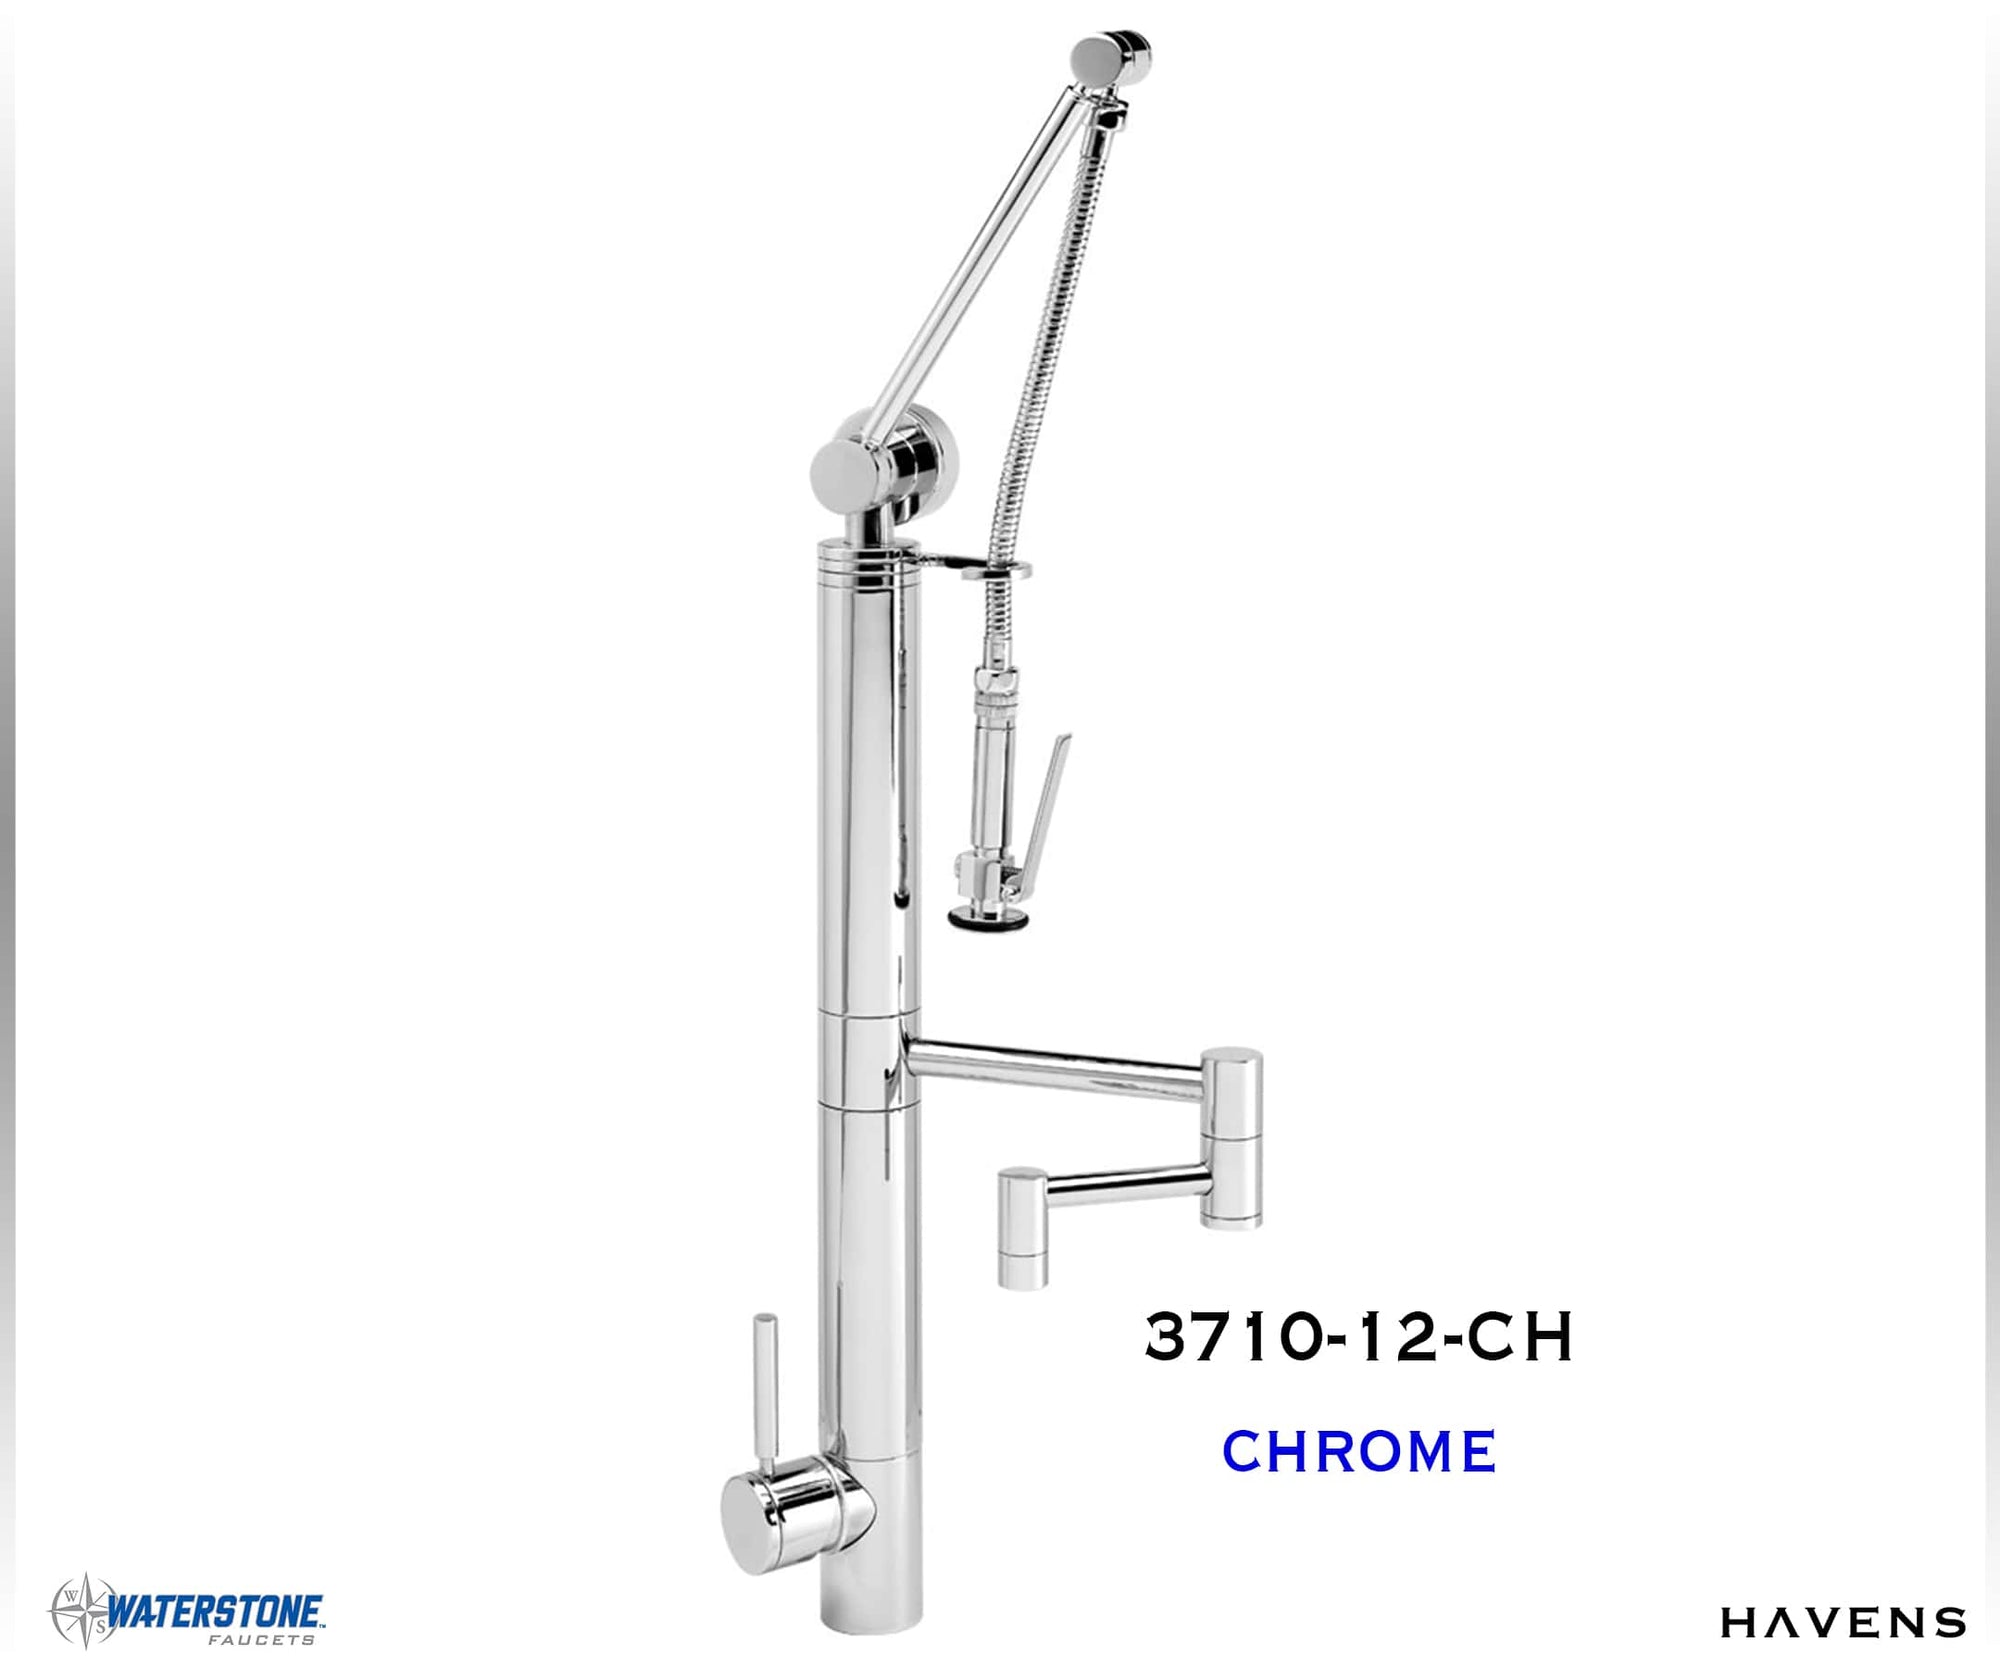 Waterstone Contemporary Gantry Faucet – Straight Spout 3710-12